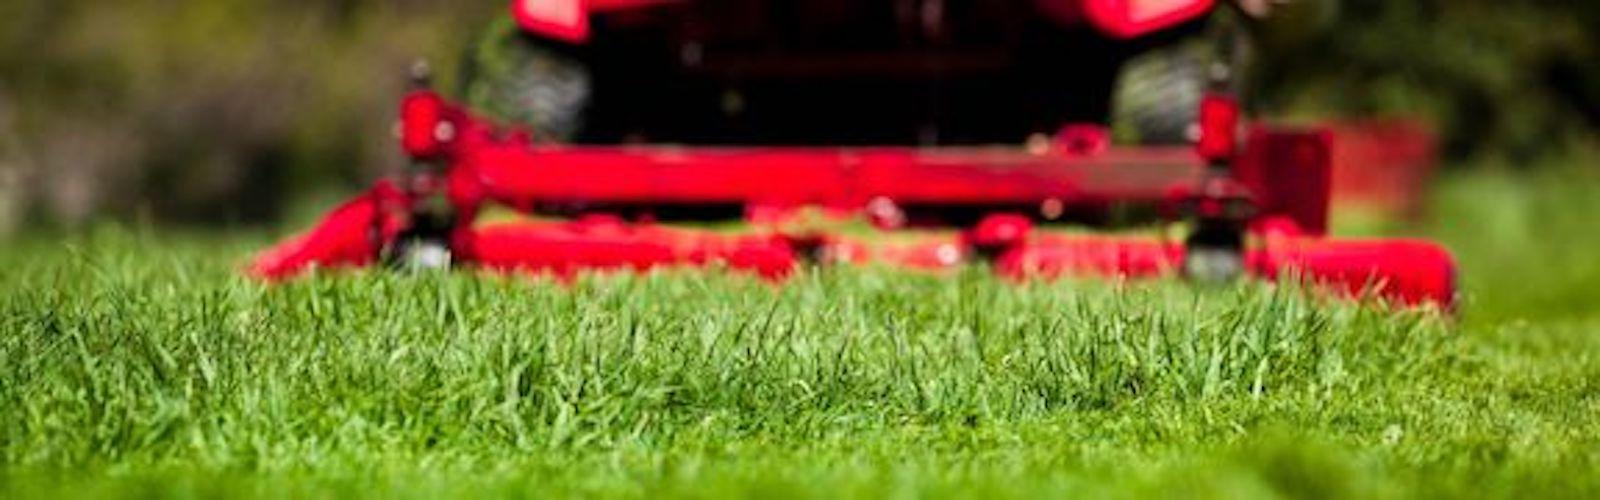 Grass with red lawn mower in the background for cultural practices and turf blog.